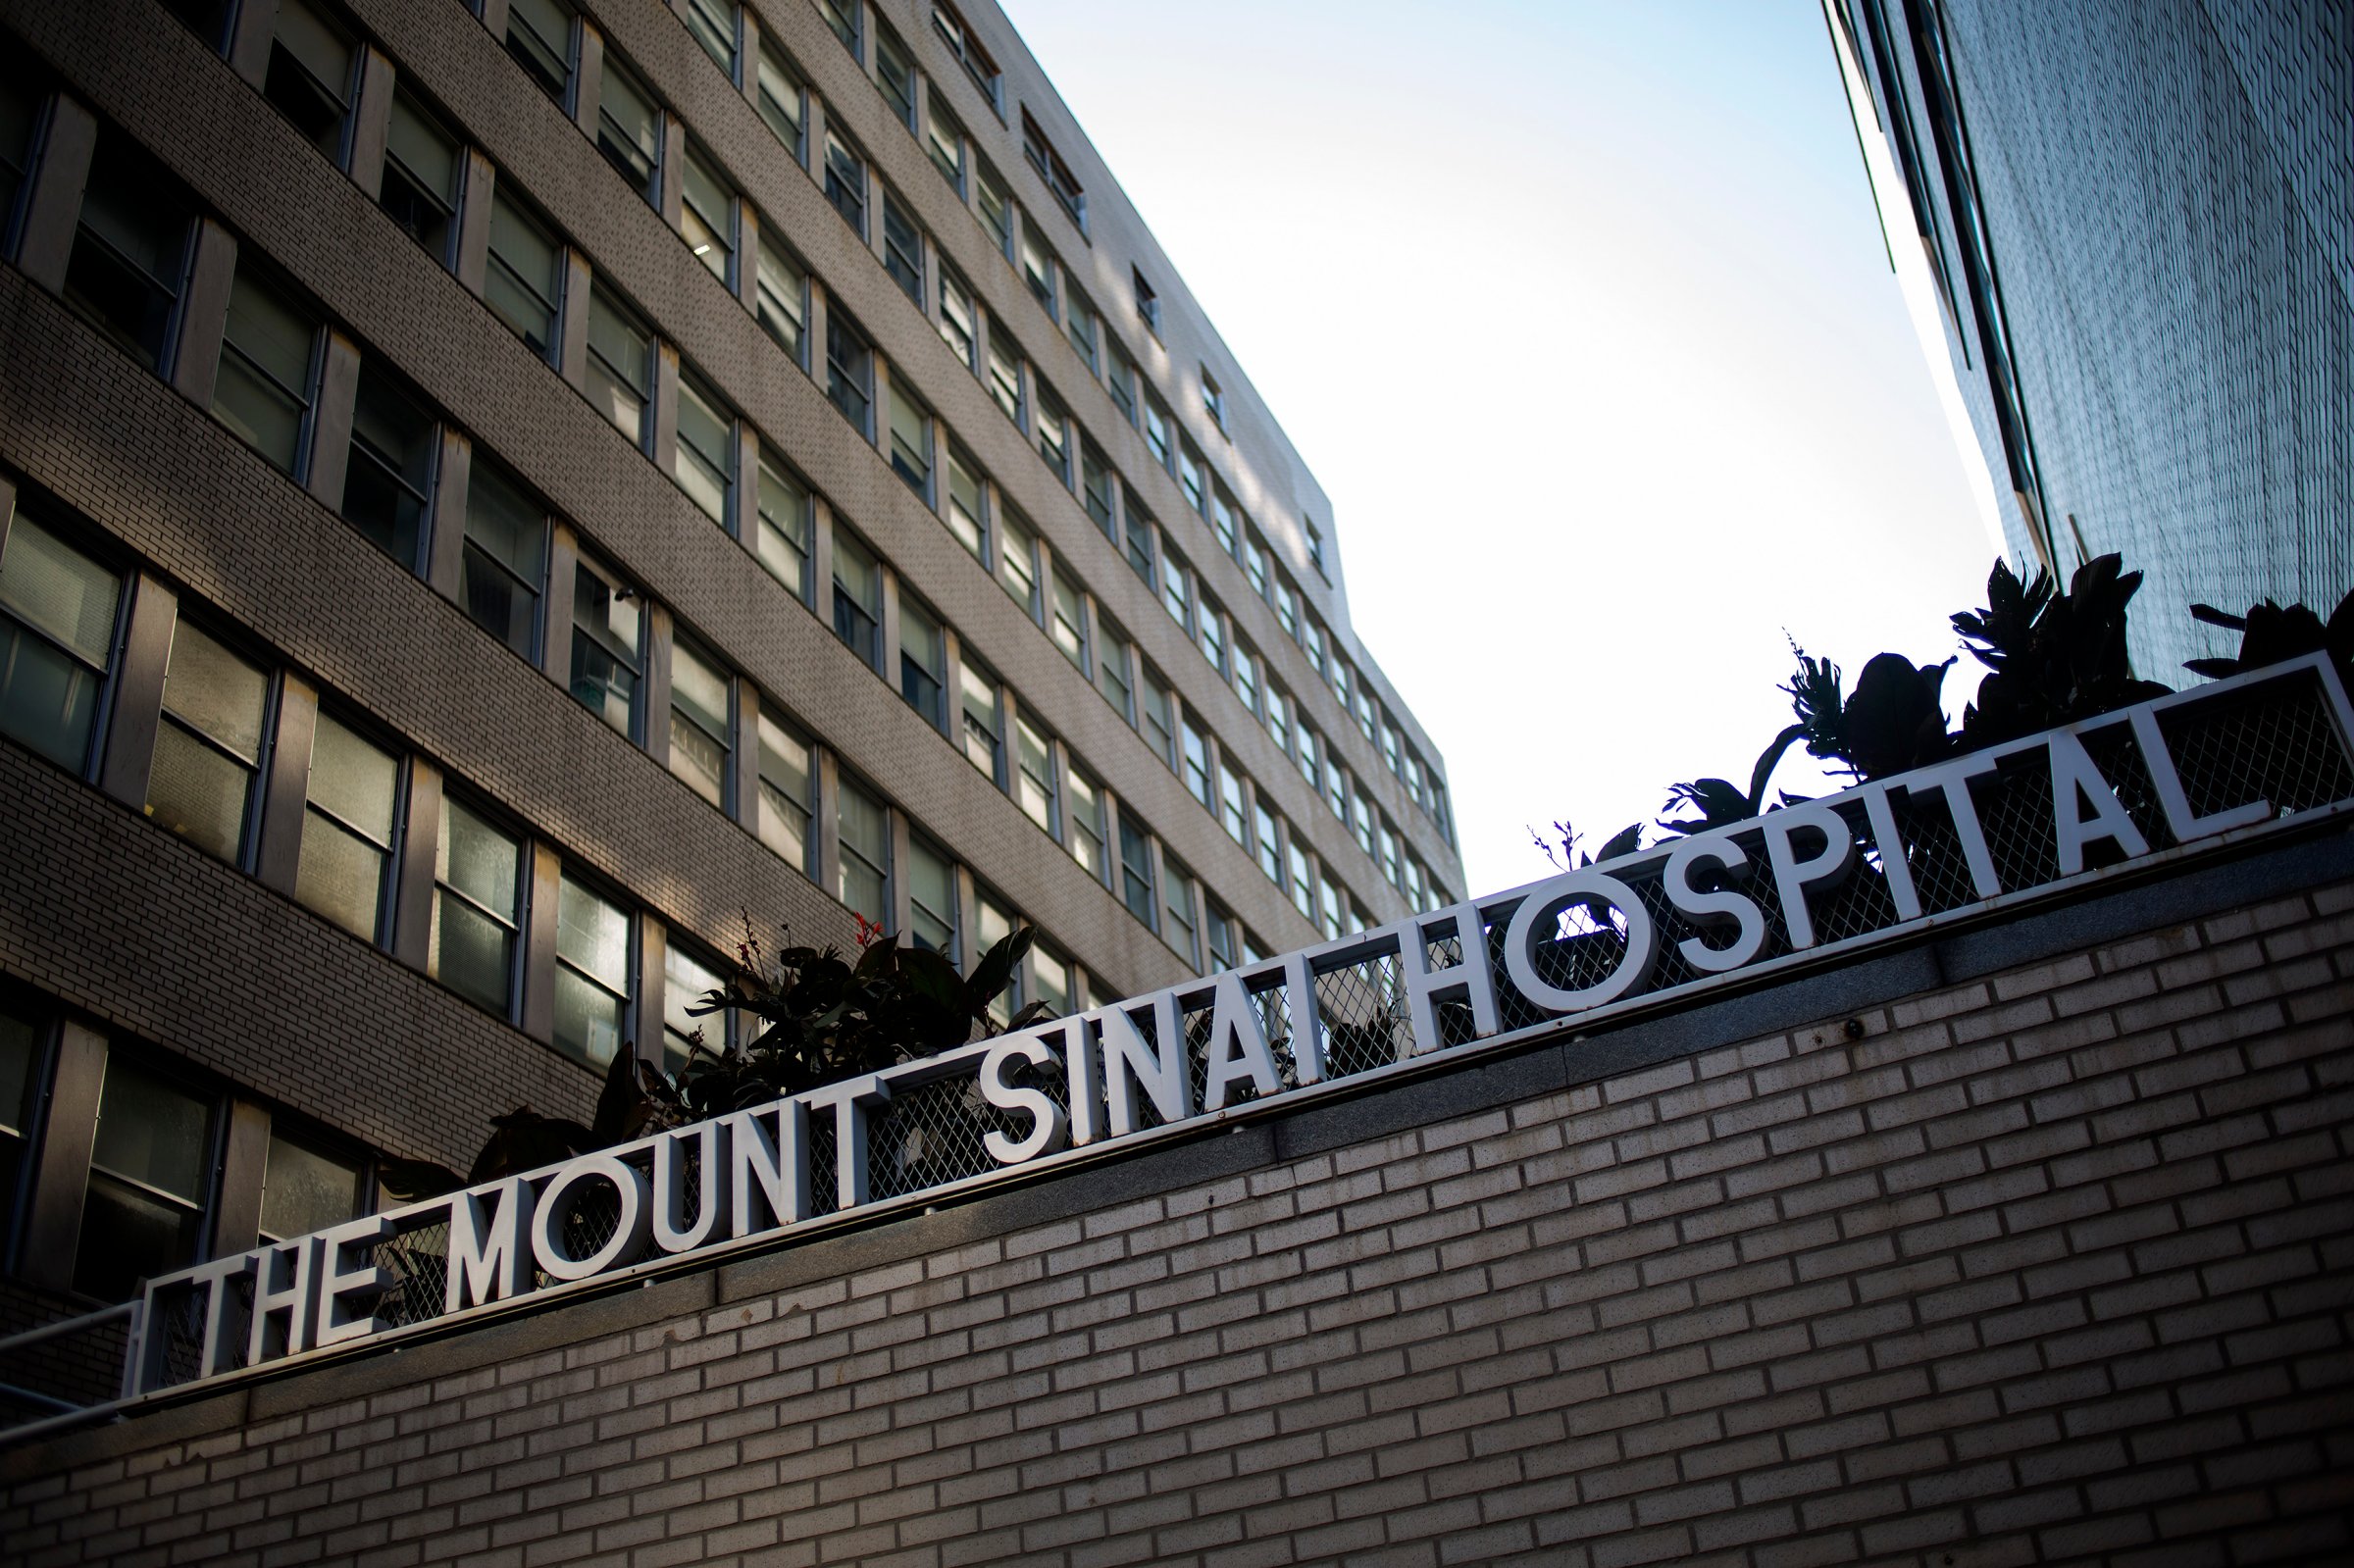 Signage hangs outside Mount Sinai Hospital on August 4, 2014 in New York City.